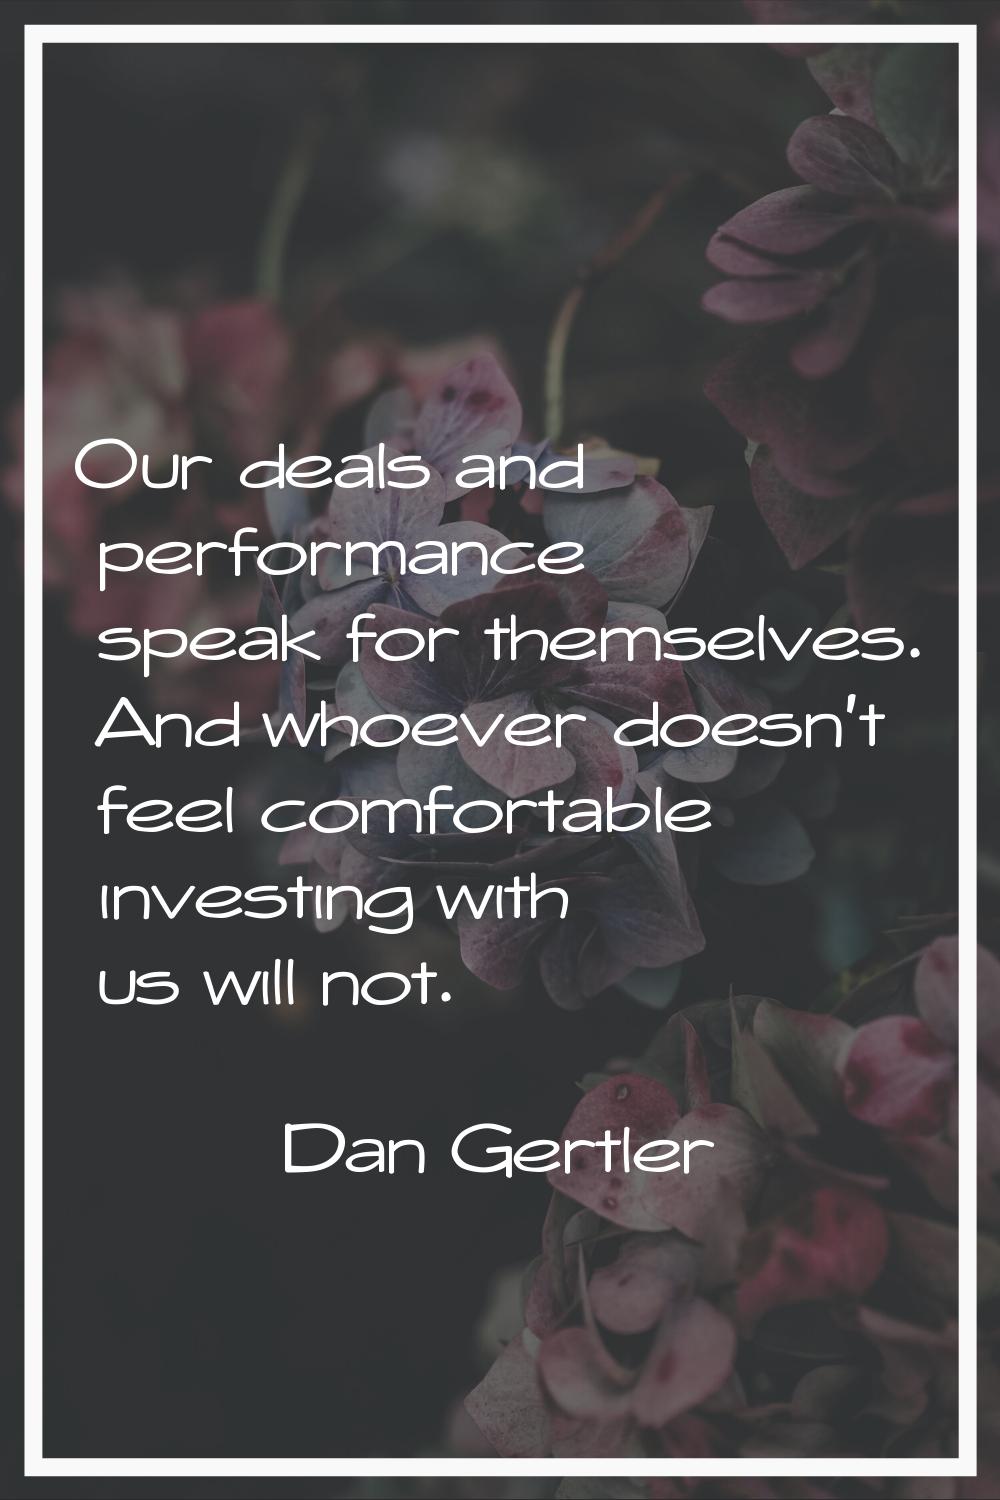 Our deals and performance speak for themselves. And whoever doesn't feel comfortable investing with